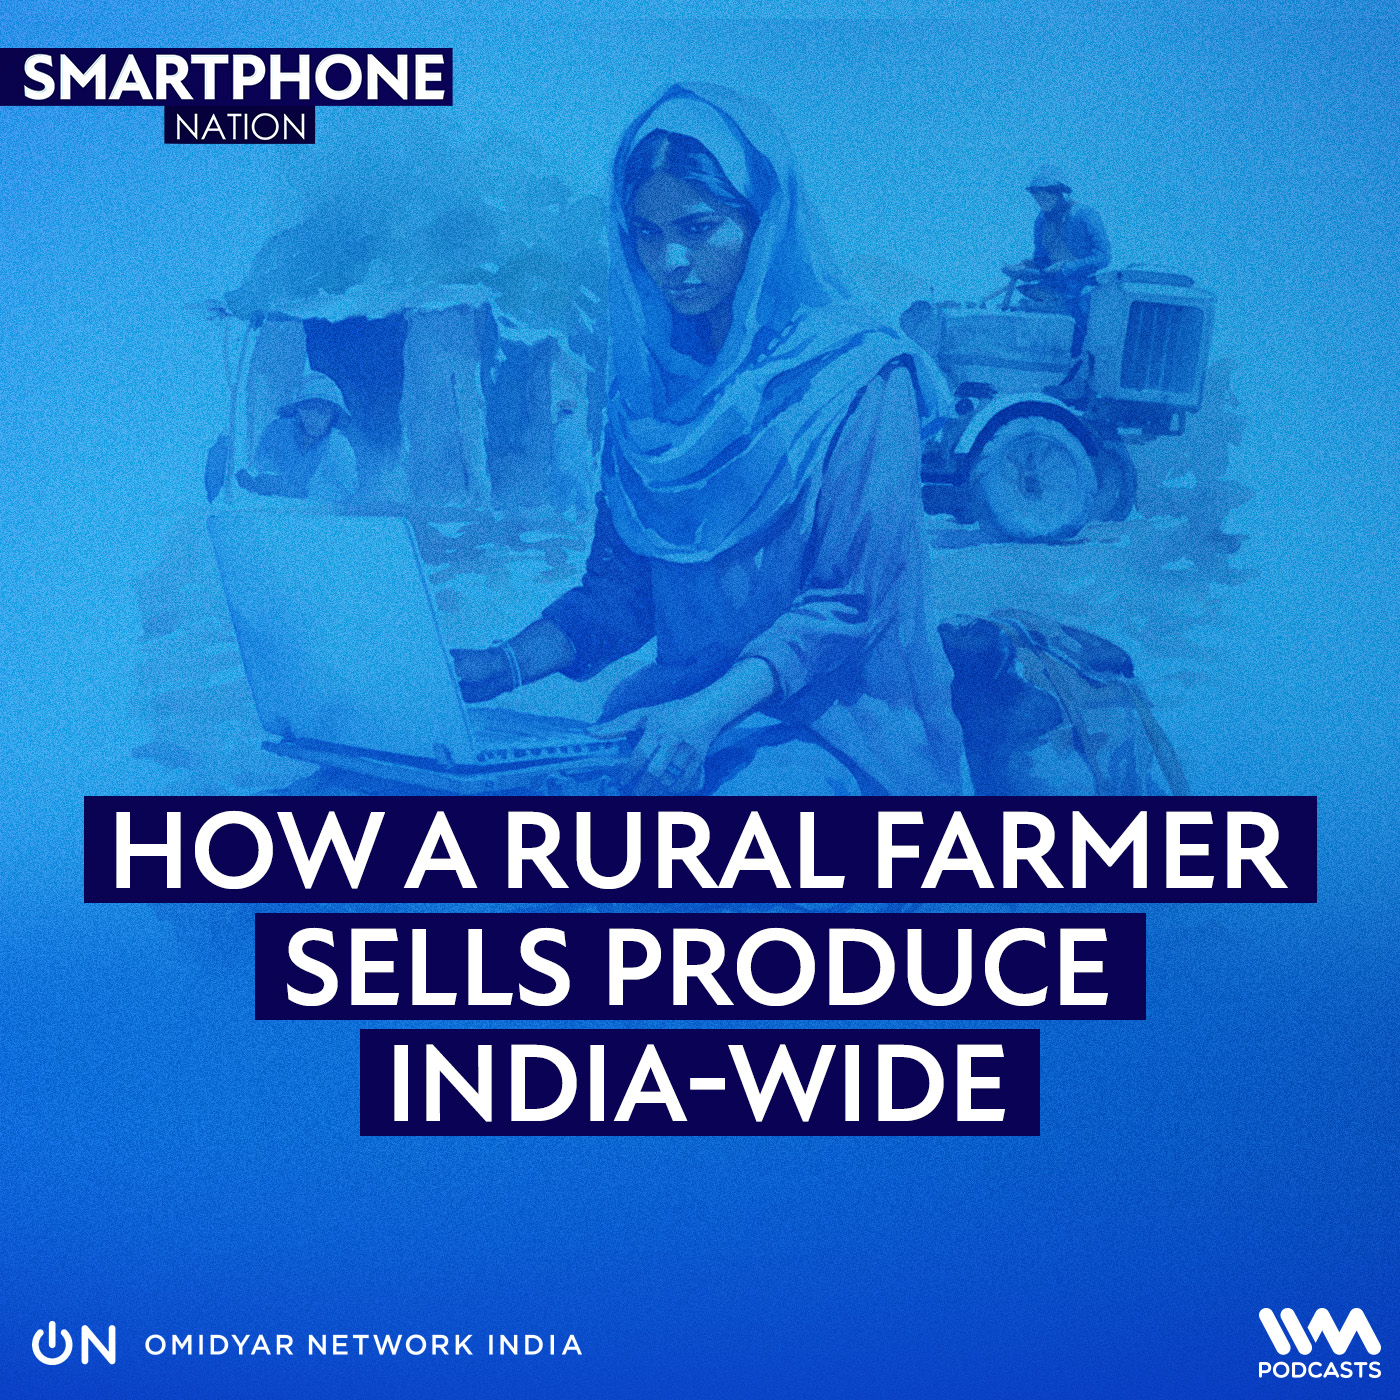 How a Rural Farmer Sells Produce India-Wide